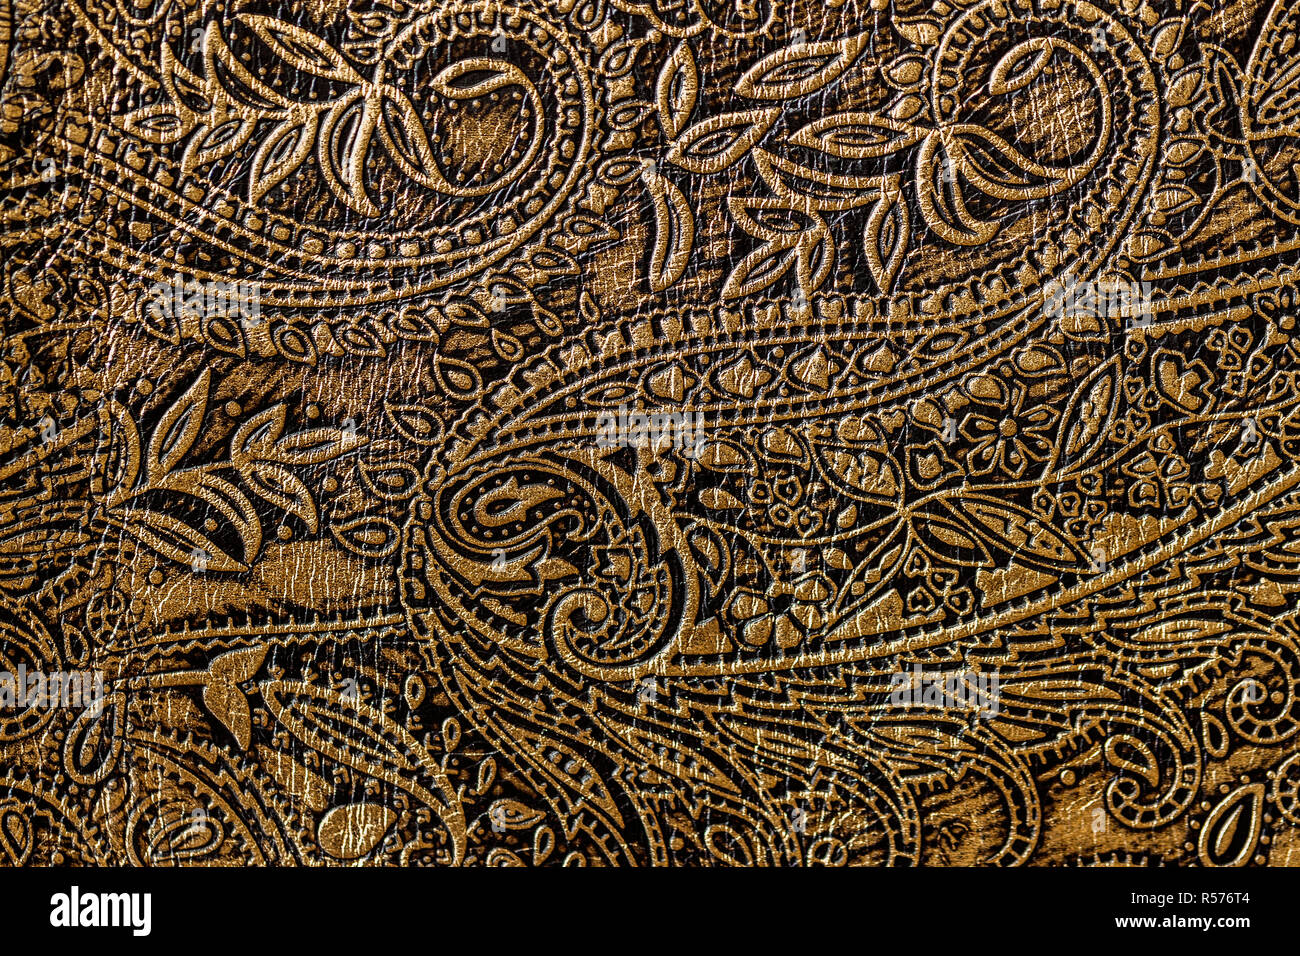 Texture of golden brown genuine leather close-up, with embossed floral  trend pattern, wallpaper or banner design Stock Photo - Alamy